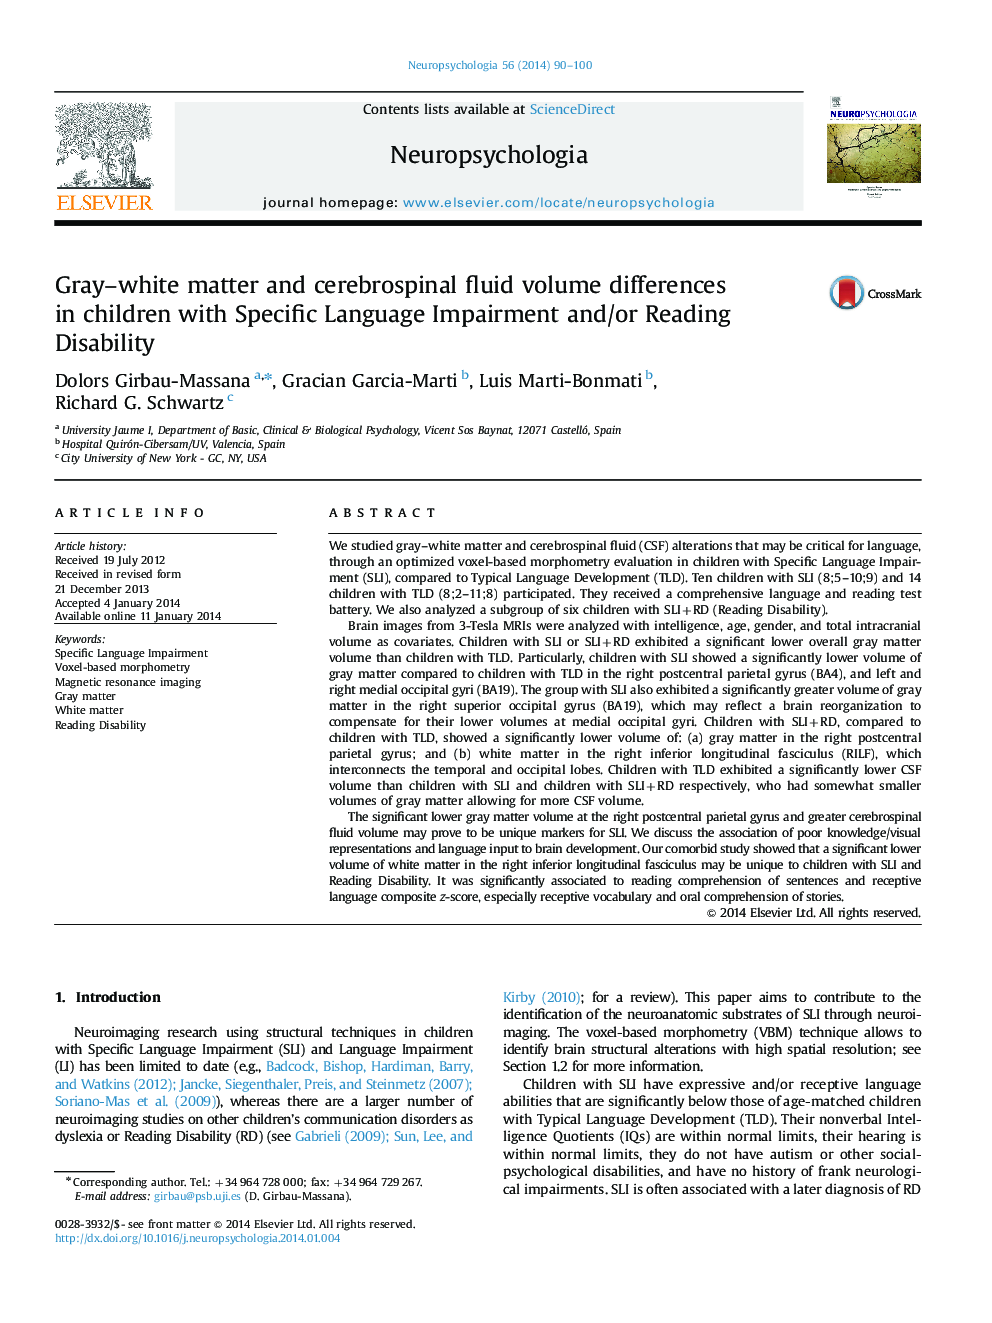 Gray-white matter and cerebrospinal fluid volume differences in children with Specific Language Impairment and/or Reading Disability